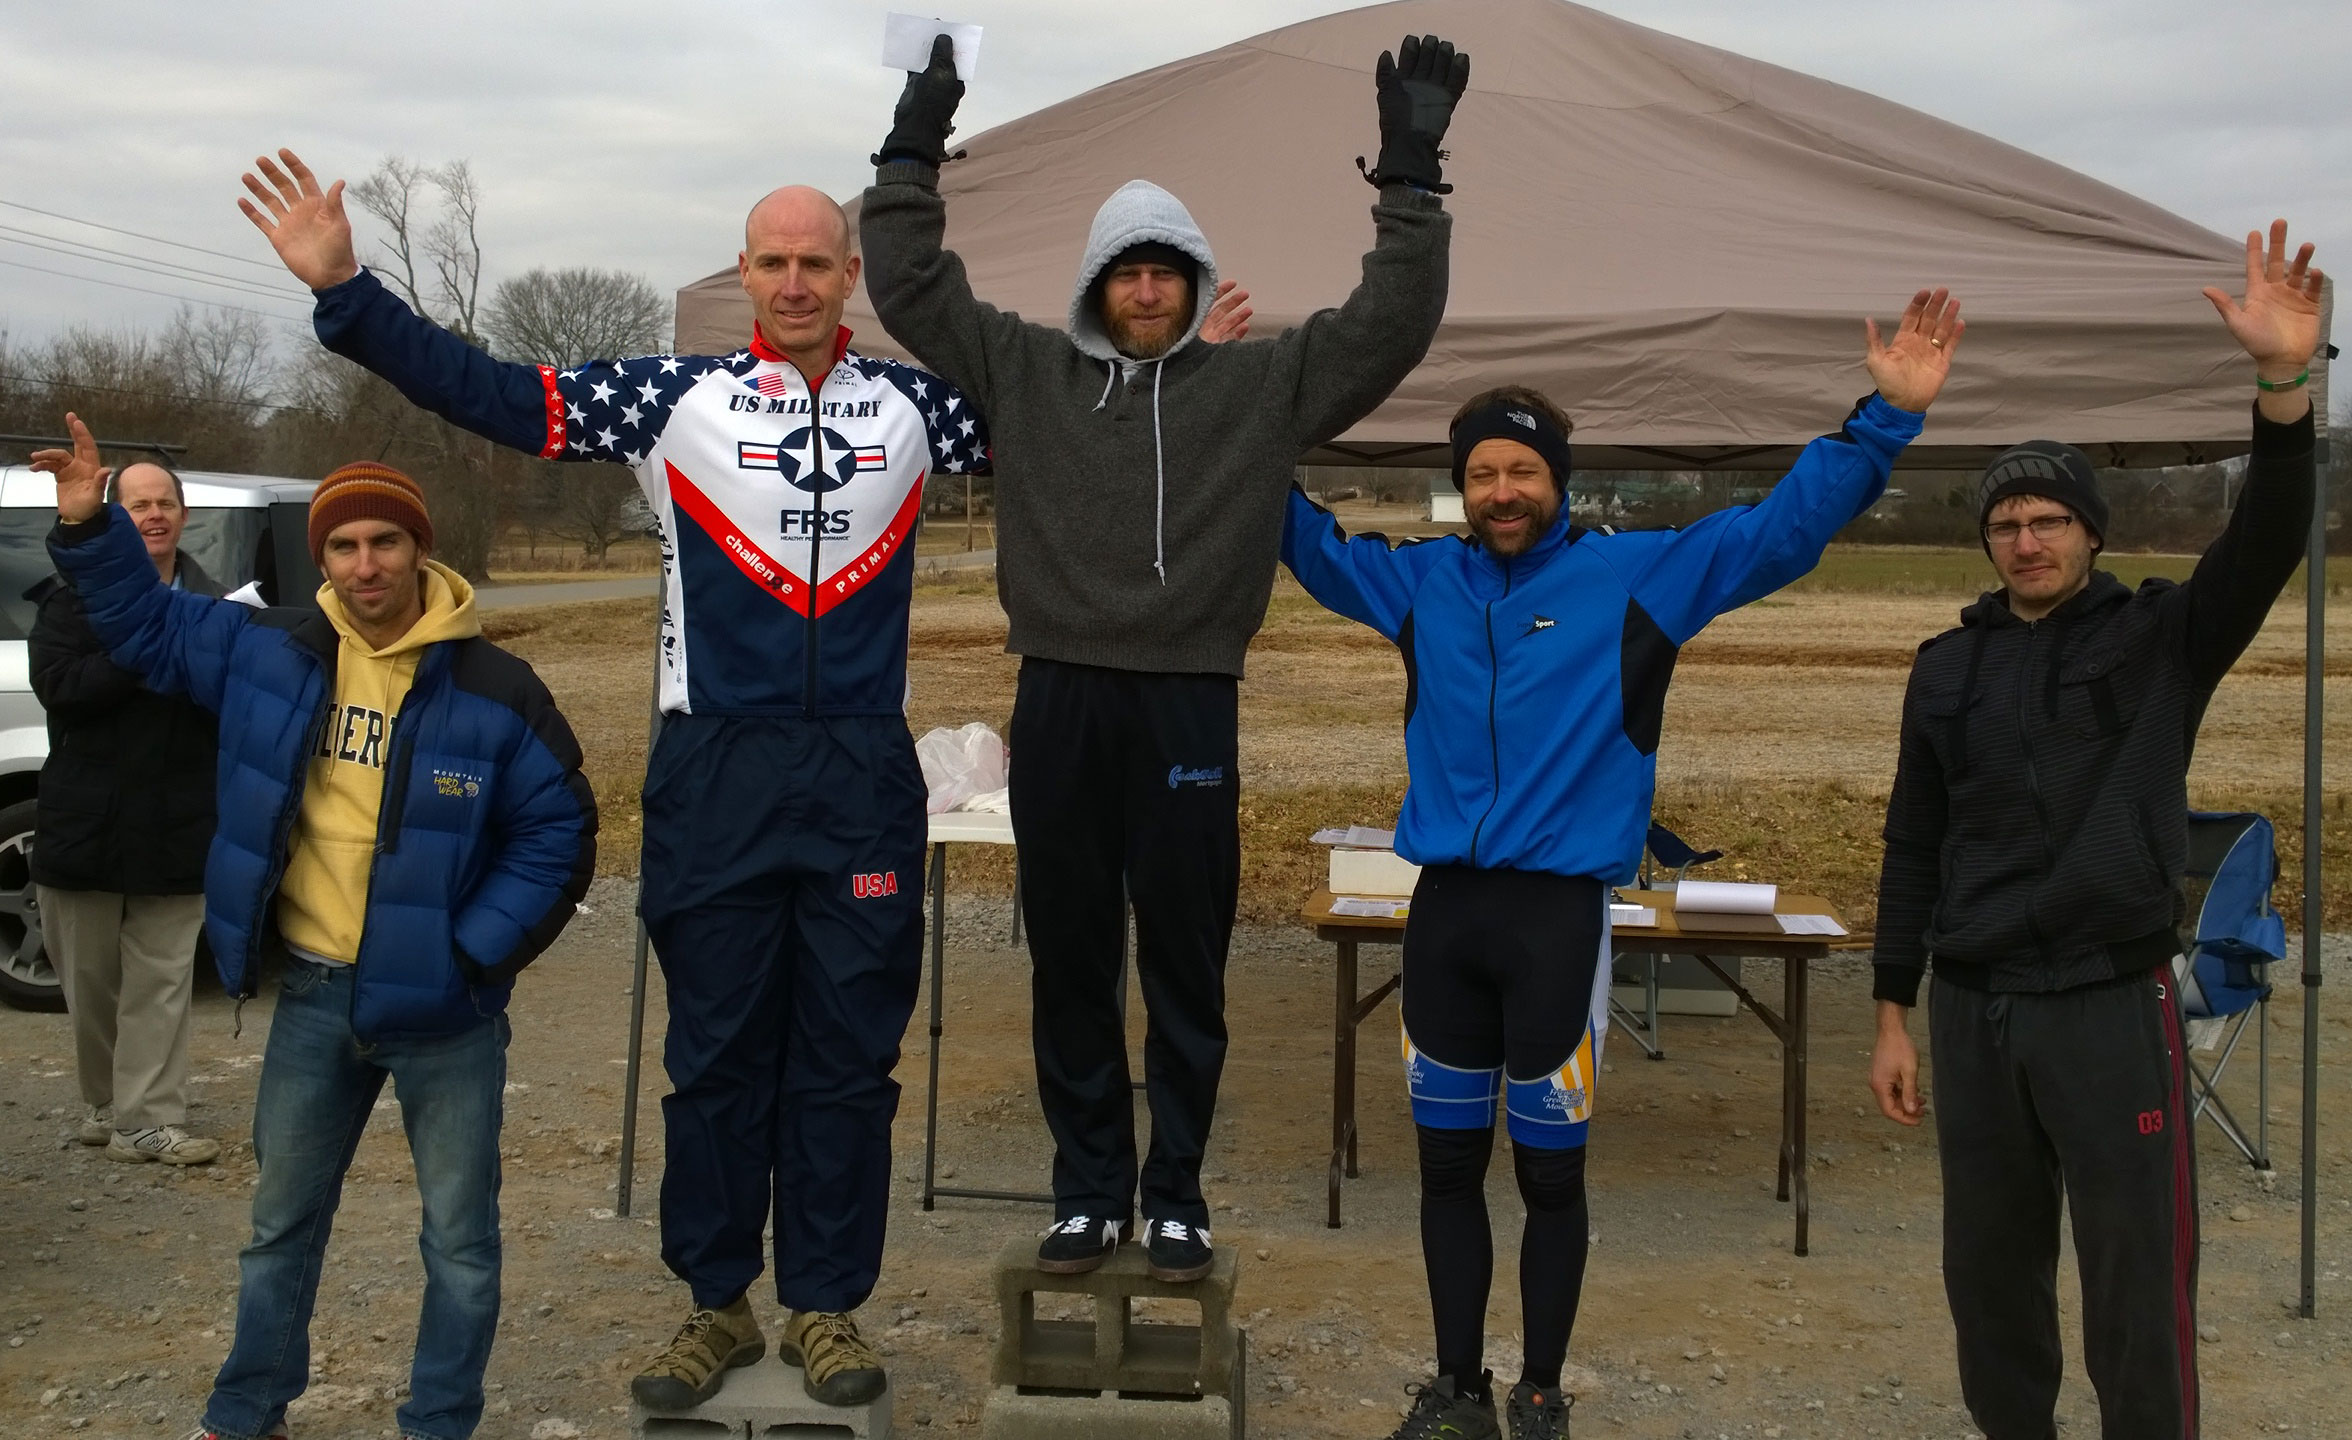 Union Grove Time Trial Podium - (left to right) - Jason Brasel (4th), Kurt Page (2nd), Mike Olheiser (1st), Me (3rd), and Doug Robinson (5th).